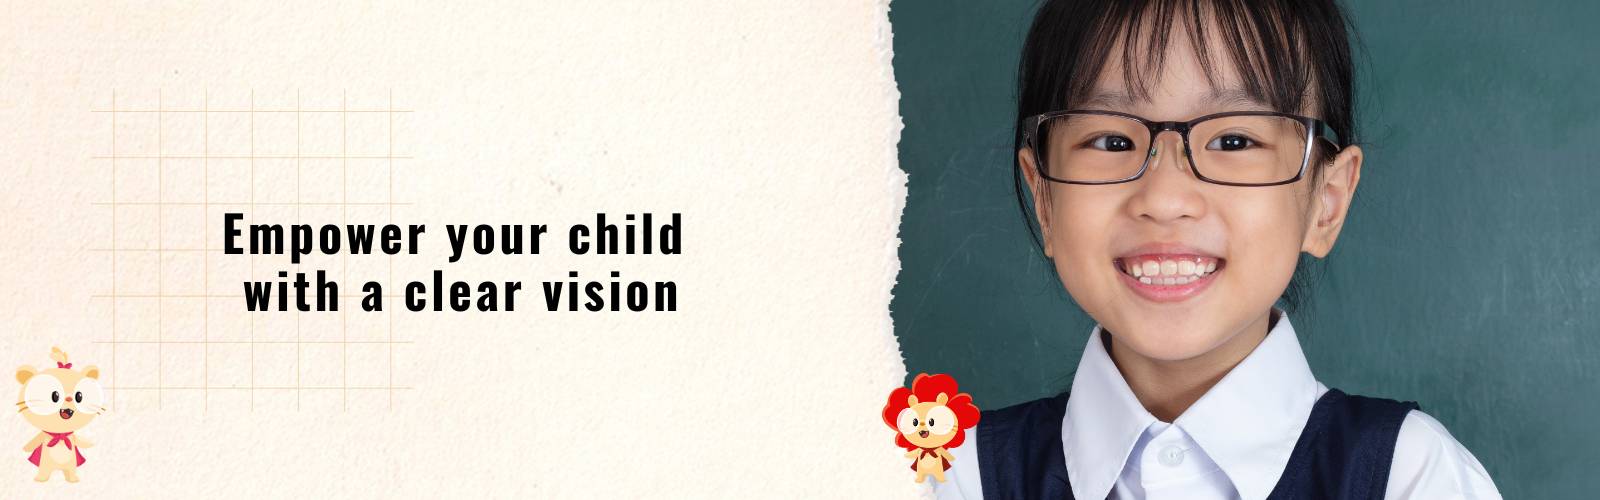 Empower your child with a clear vision